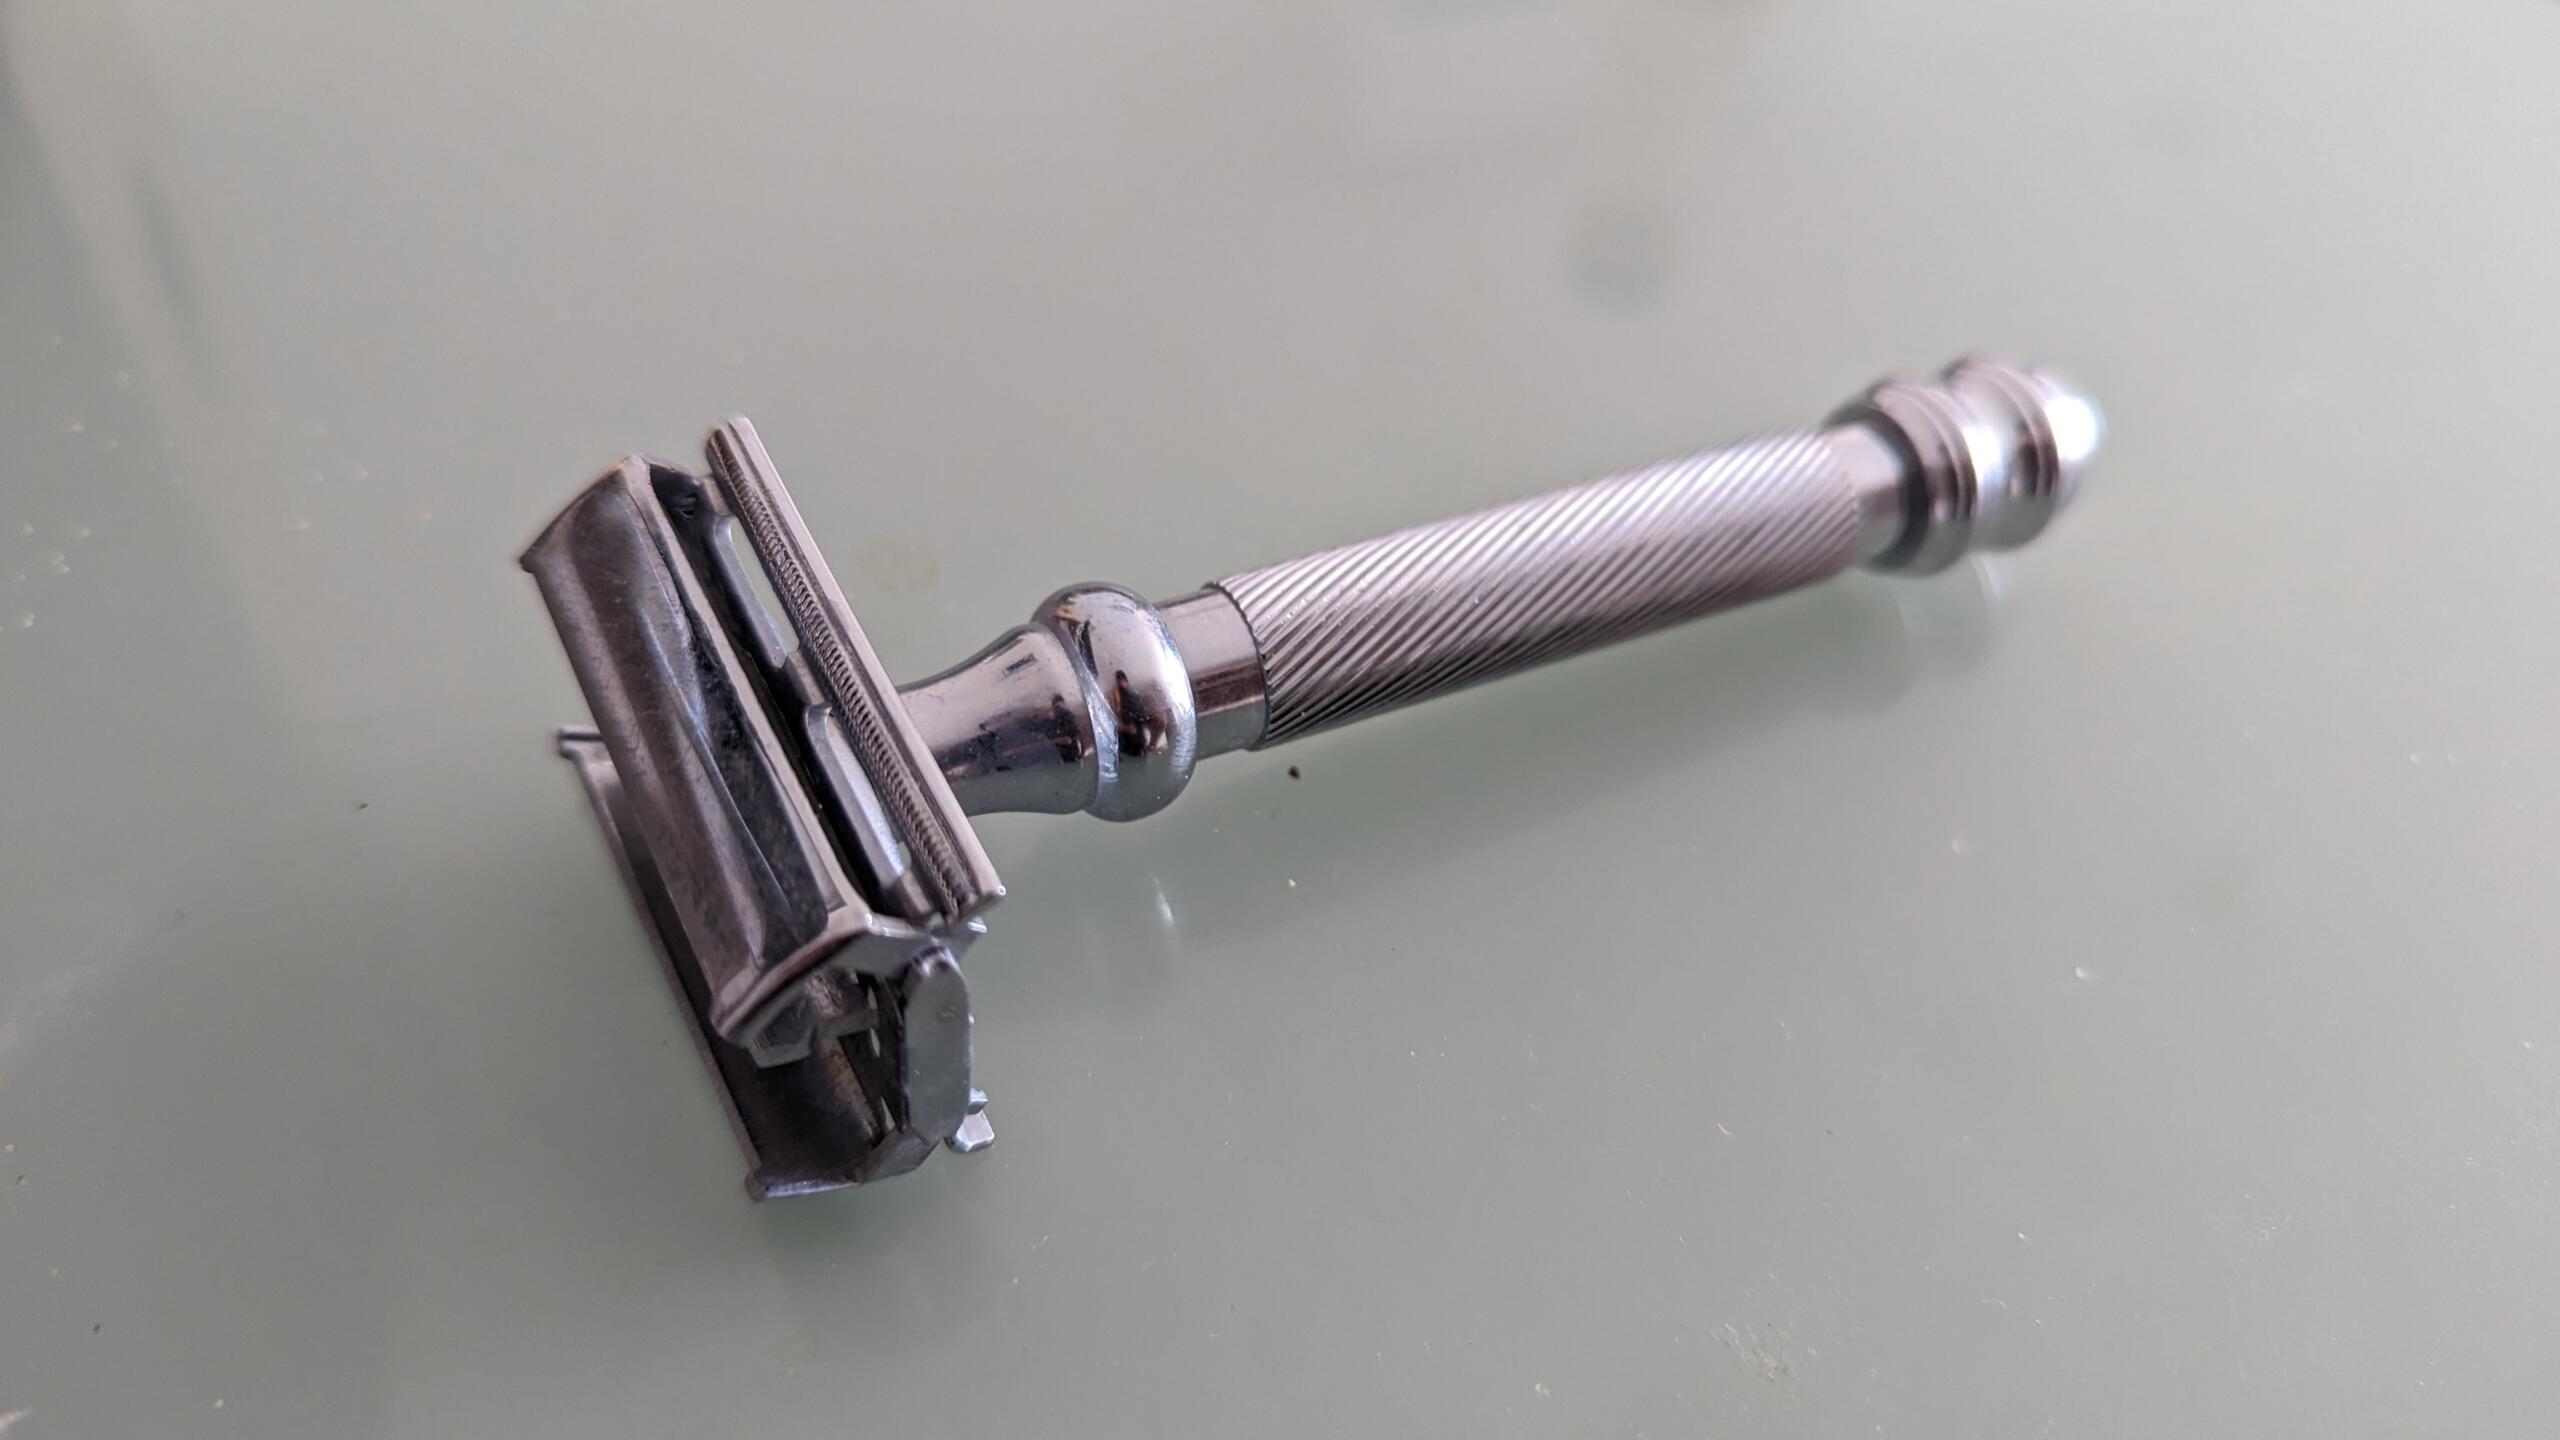 Parker 99R Safety Razor Review: The Aggressive Shaving Marvel I Use Every Day